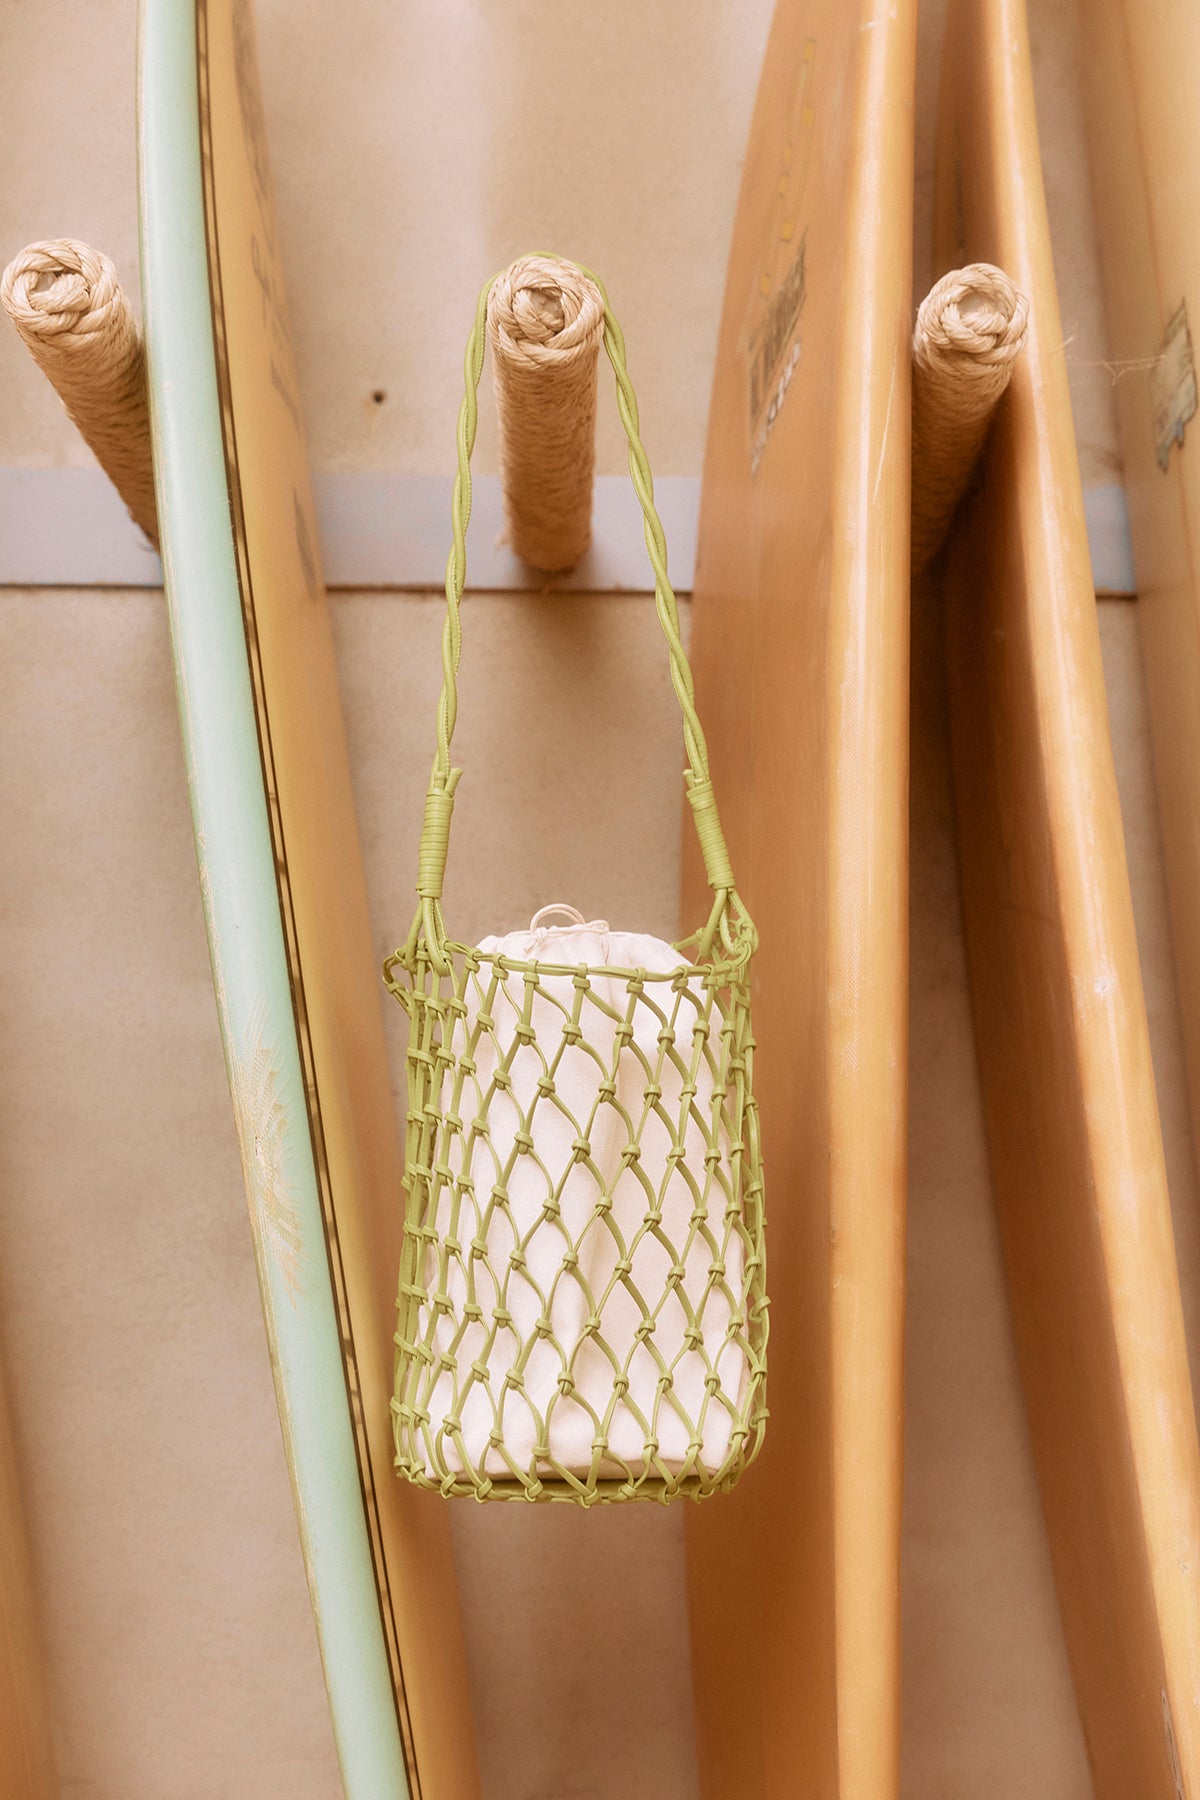 A green Velvet by Graham & Spencer mesh tote bag hanging from a wooden bamboo pole, with other bamboo poles in the background.-37000750858433